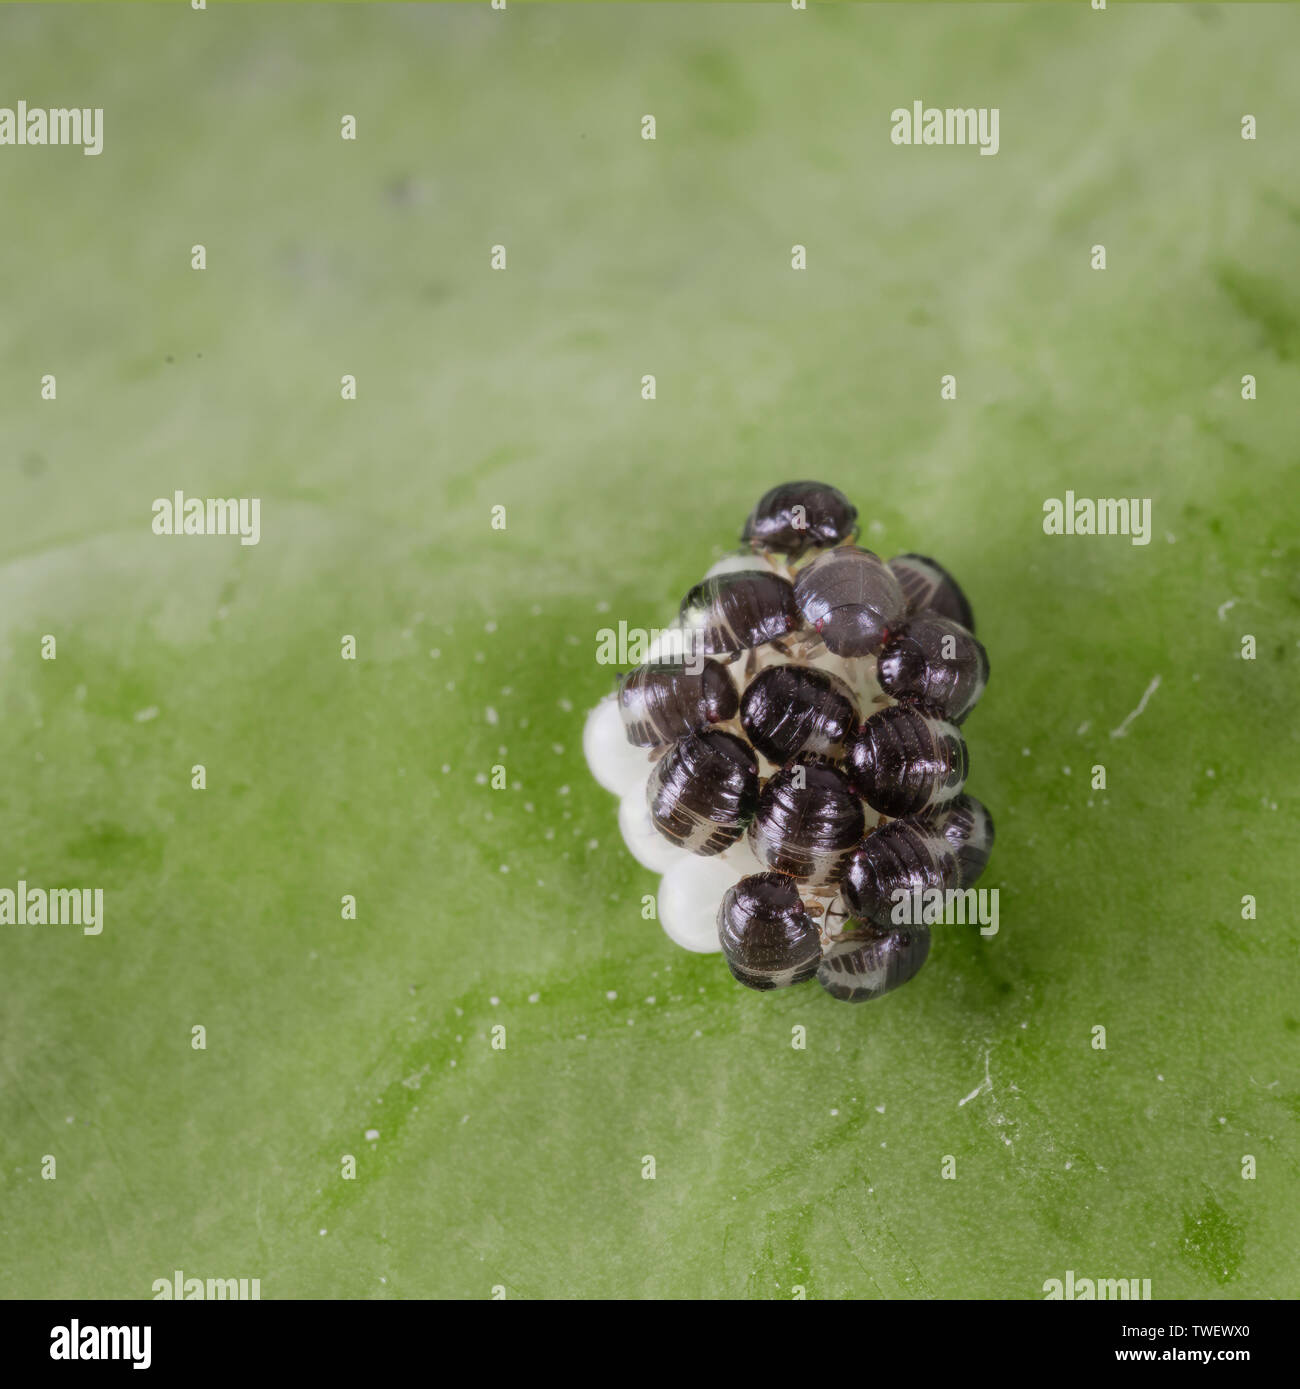 Baby Stink aka Shield bugs just hatching from eggs. Pest. Stock Photo